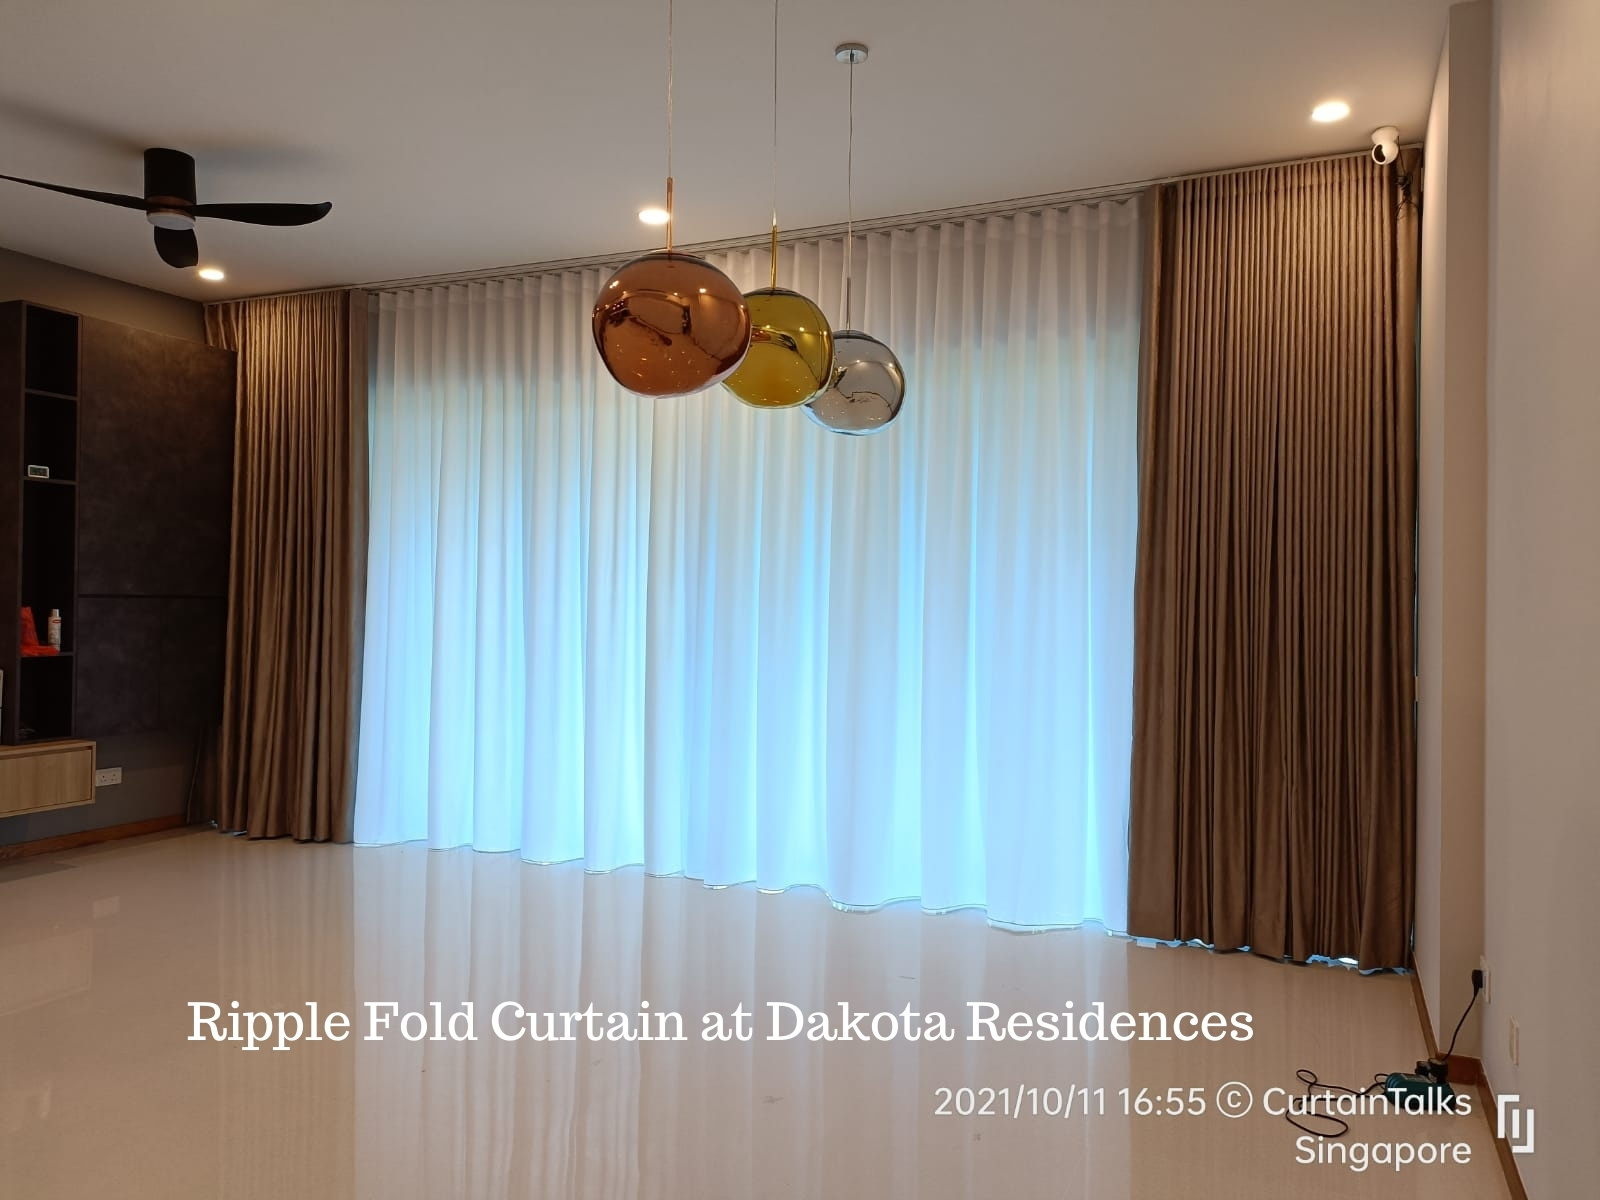 This is a Picture of Day and night curtain, S-fold, ripple fold curtain for Singapore Dakota